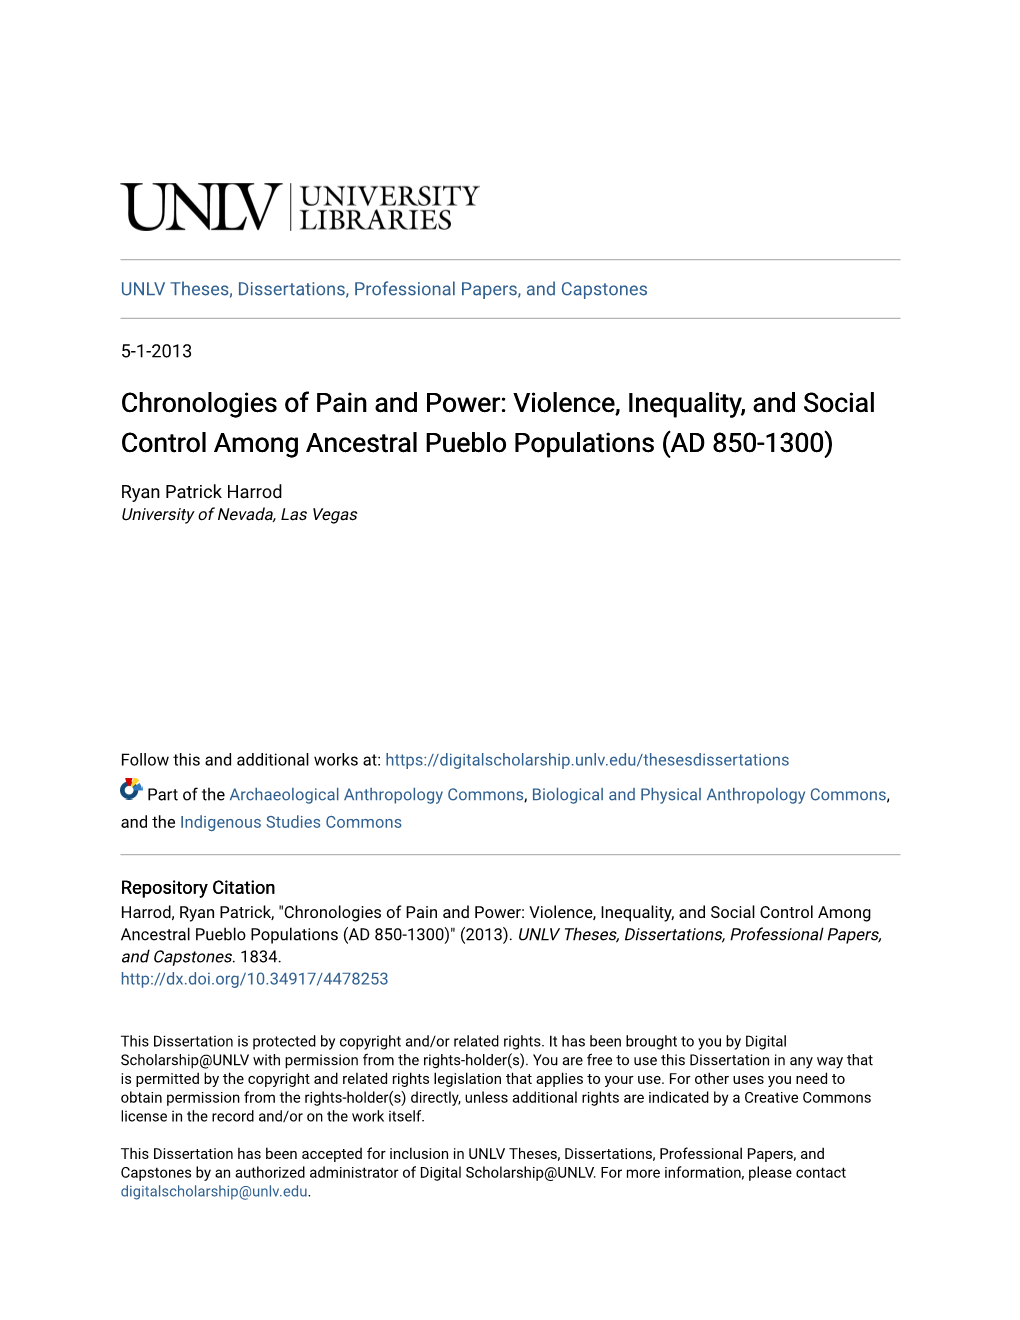 Violence, Inequality, and Social Control Among Ancestral Pueblo Populations (AD 850-1300)